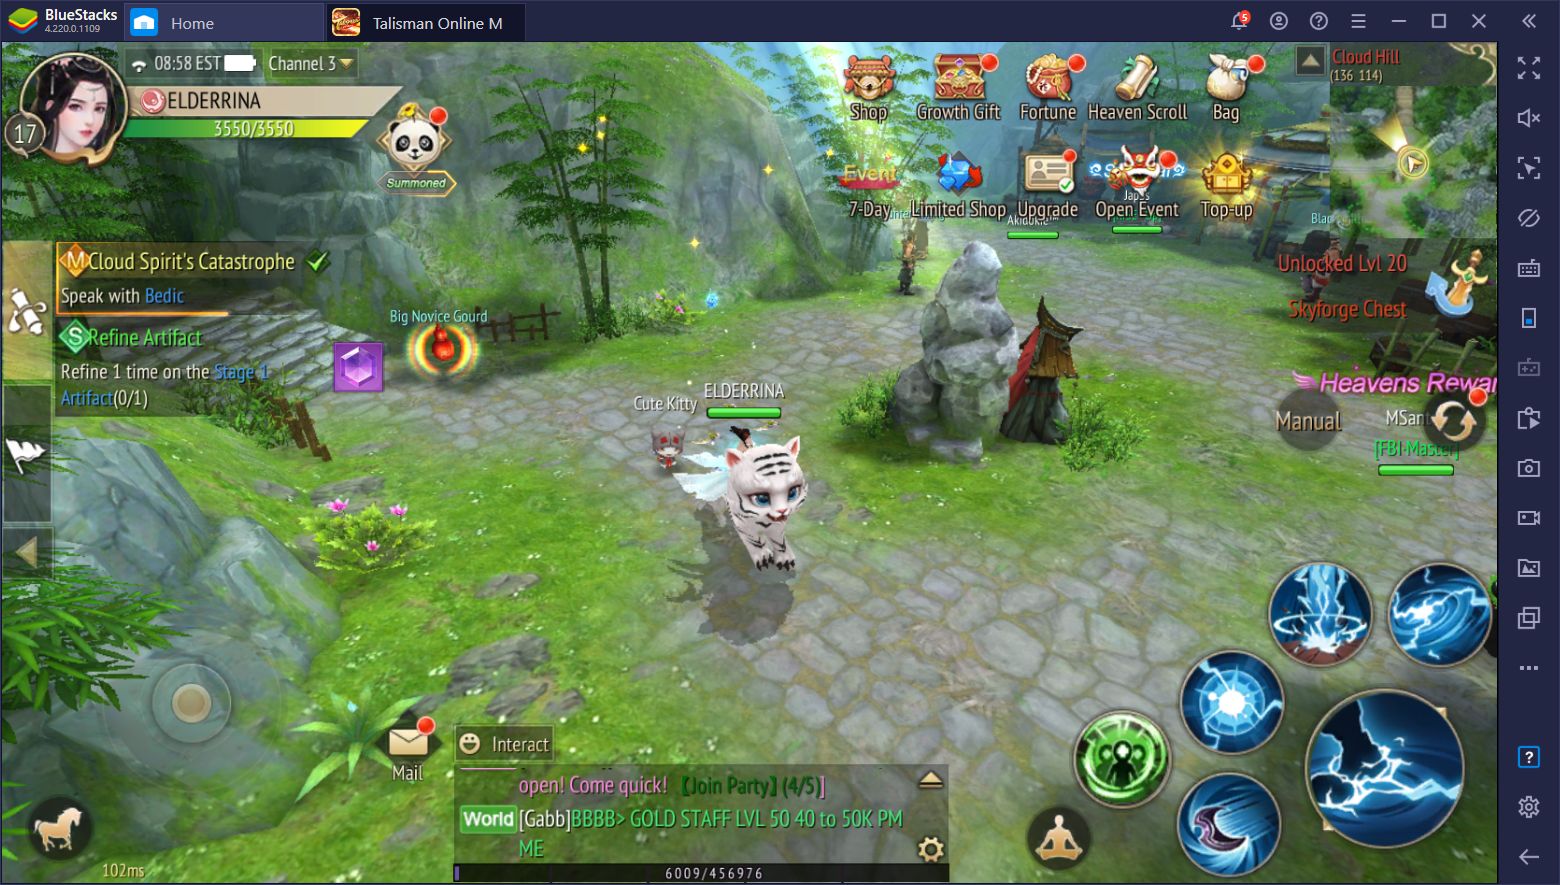 Talisman Online M on PC - How to Install and Play This New Mobile MMORPG on PC With BlueStacks